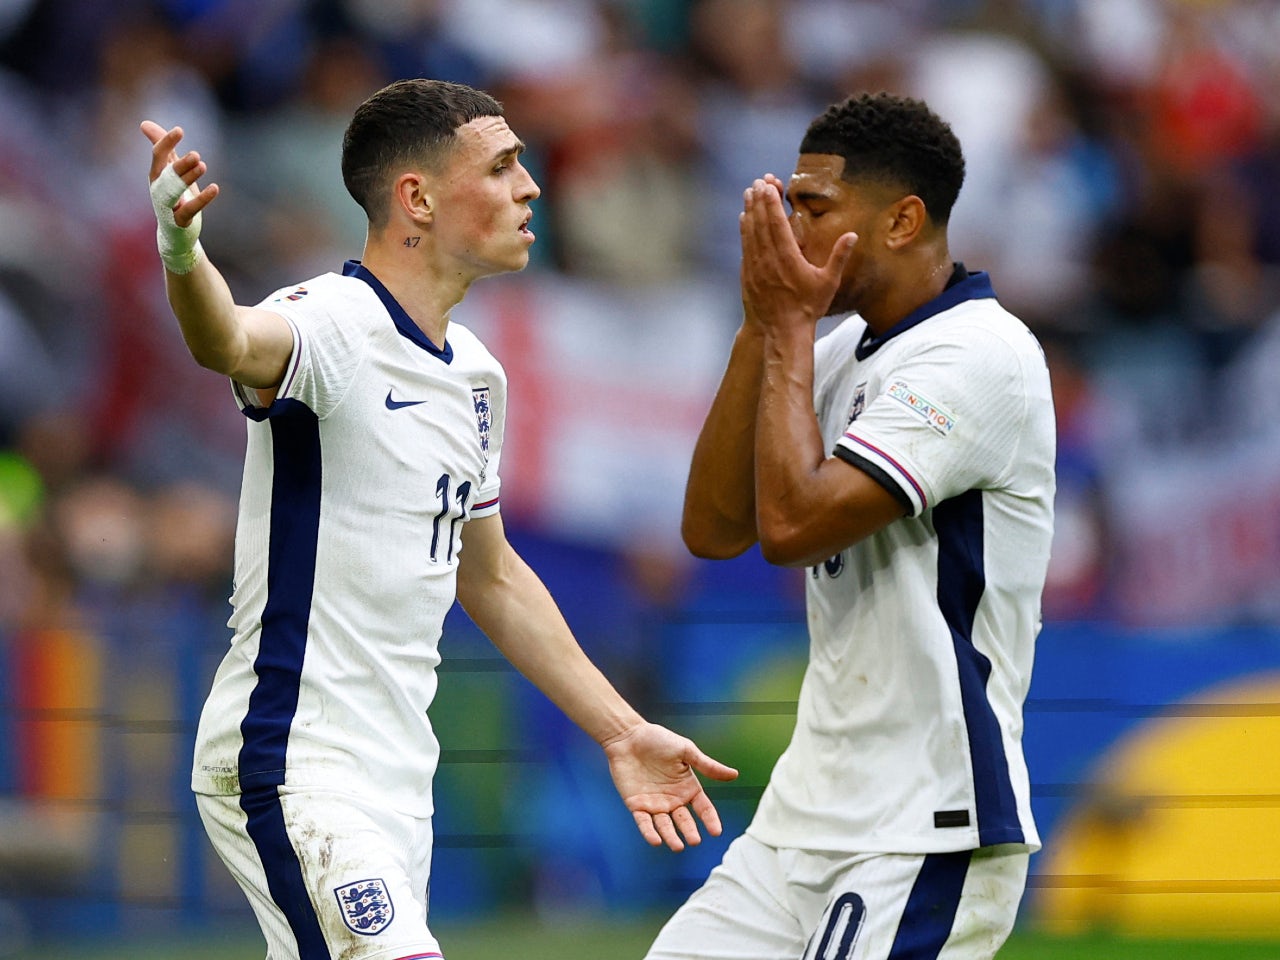 England's Phil Foden 'does not agree' with views on Jude Bellingham partnership